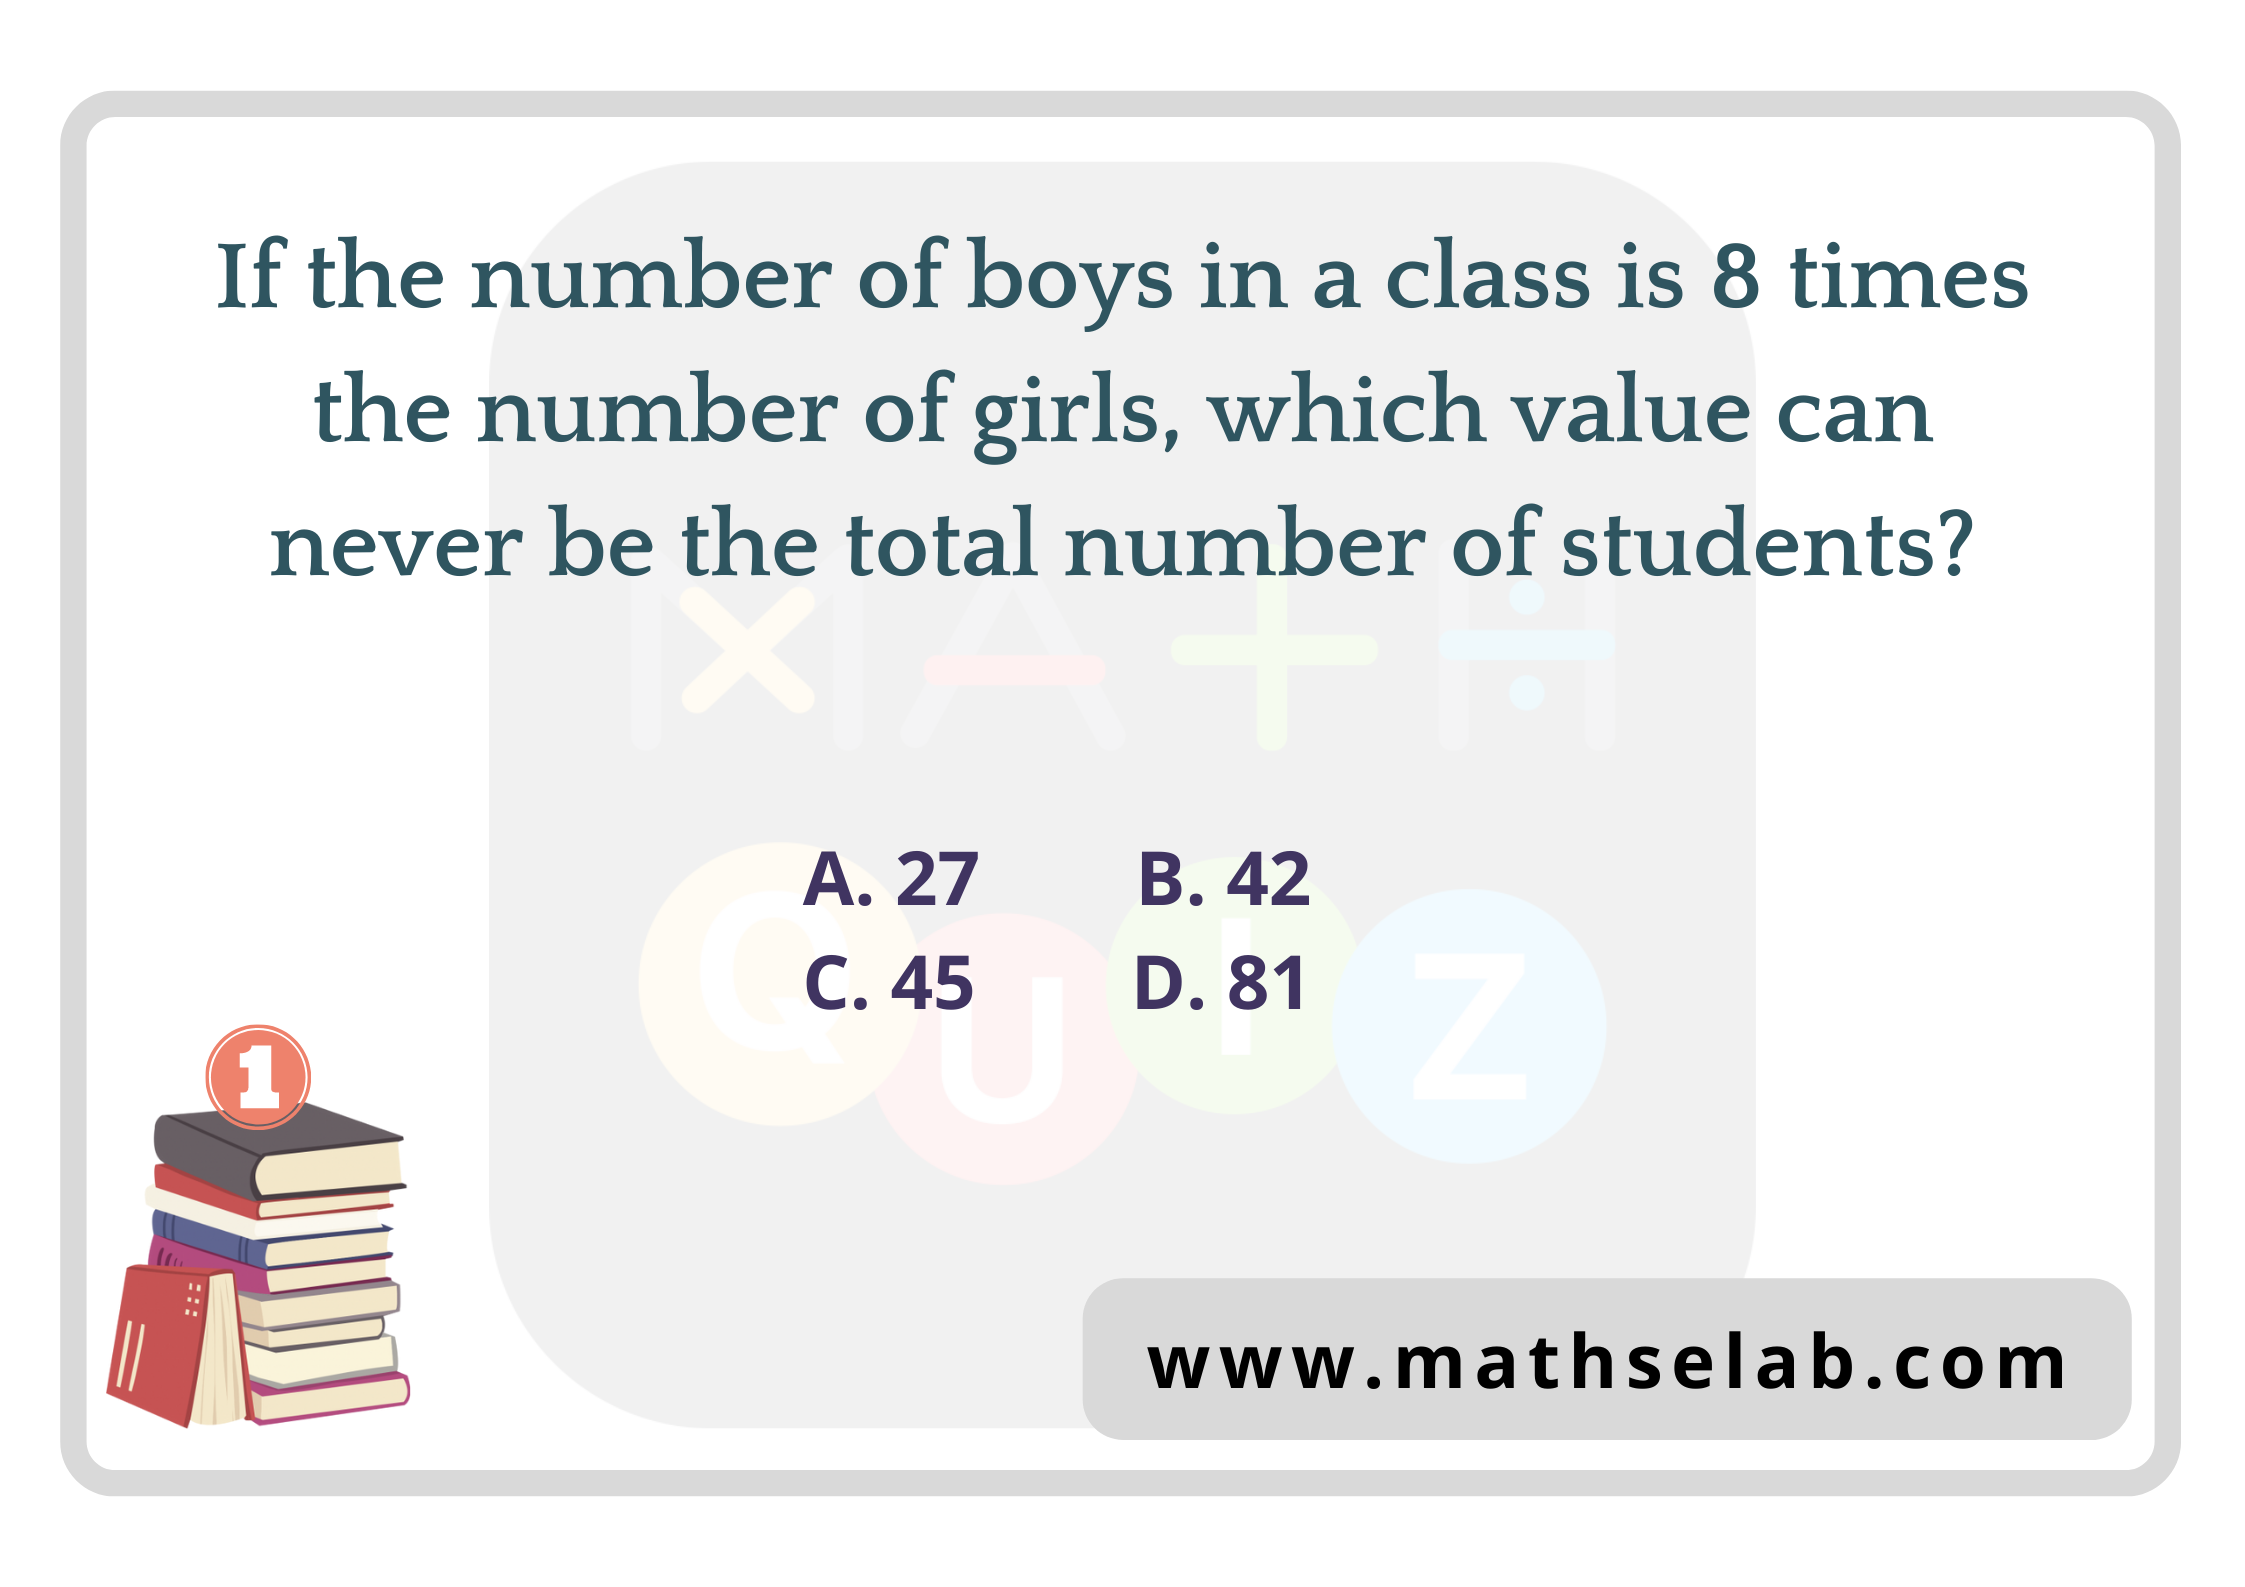 If the number of boys in a class is 8 times the number of girls, which value can never be the total number of students - mathselab.com